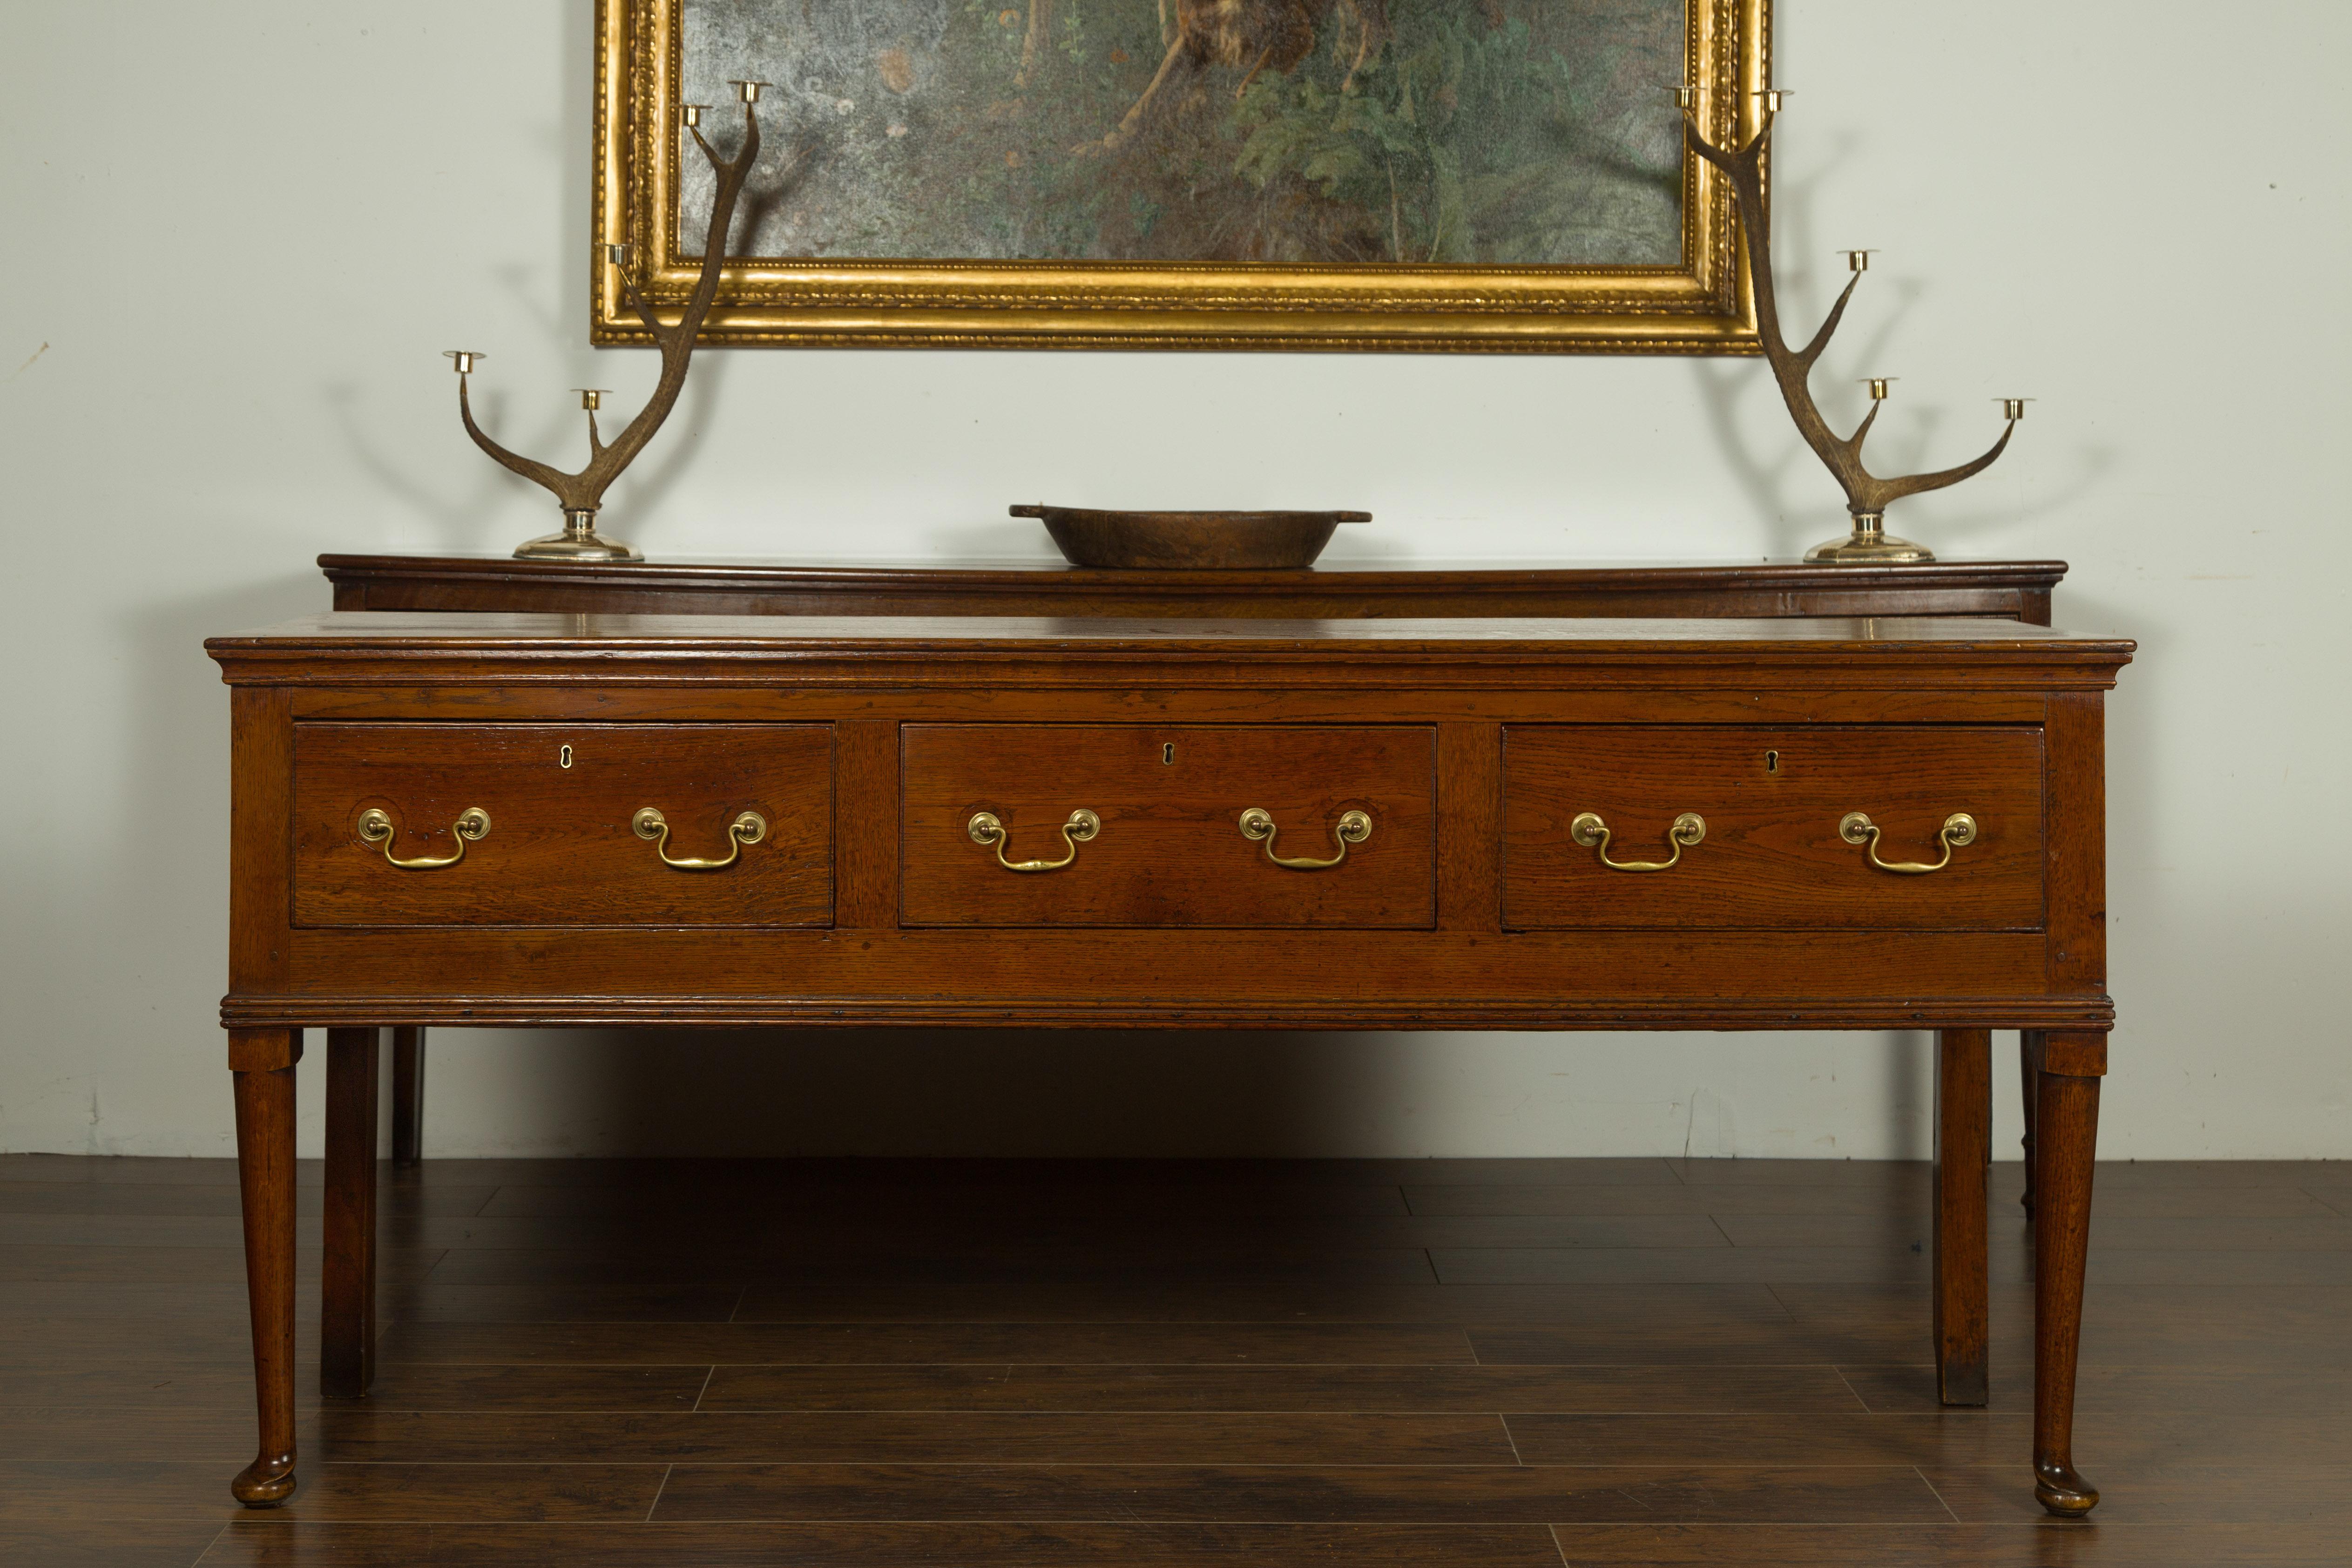 An English Georgian period oak dresser base from the early 19th century, with three drawers and pad feet. Born in England during the first quarter of the 19th century, this oak dresser base features a rectangular top sitting above three dovetailed